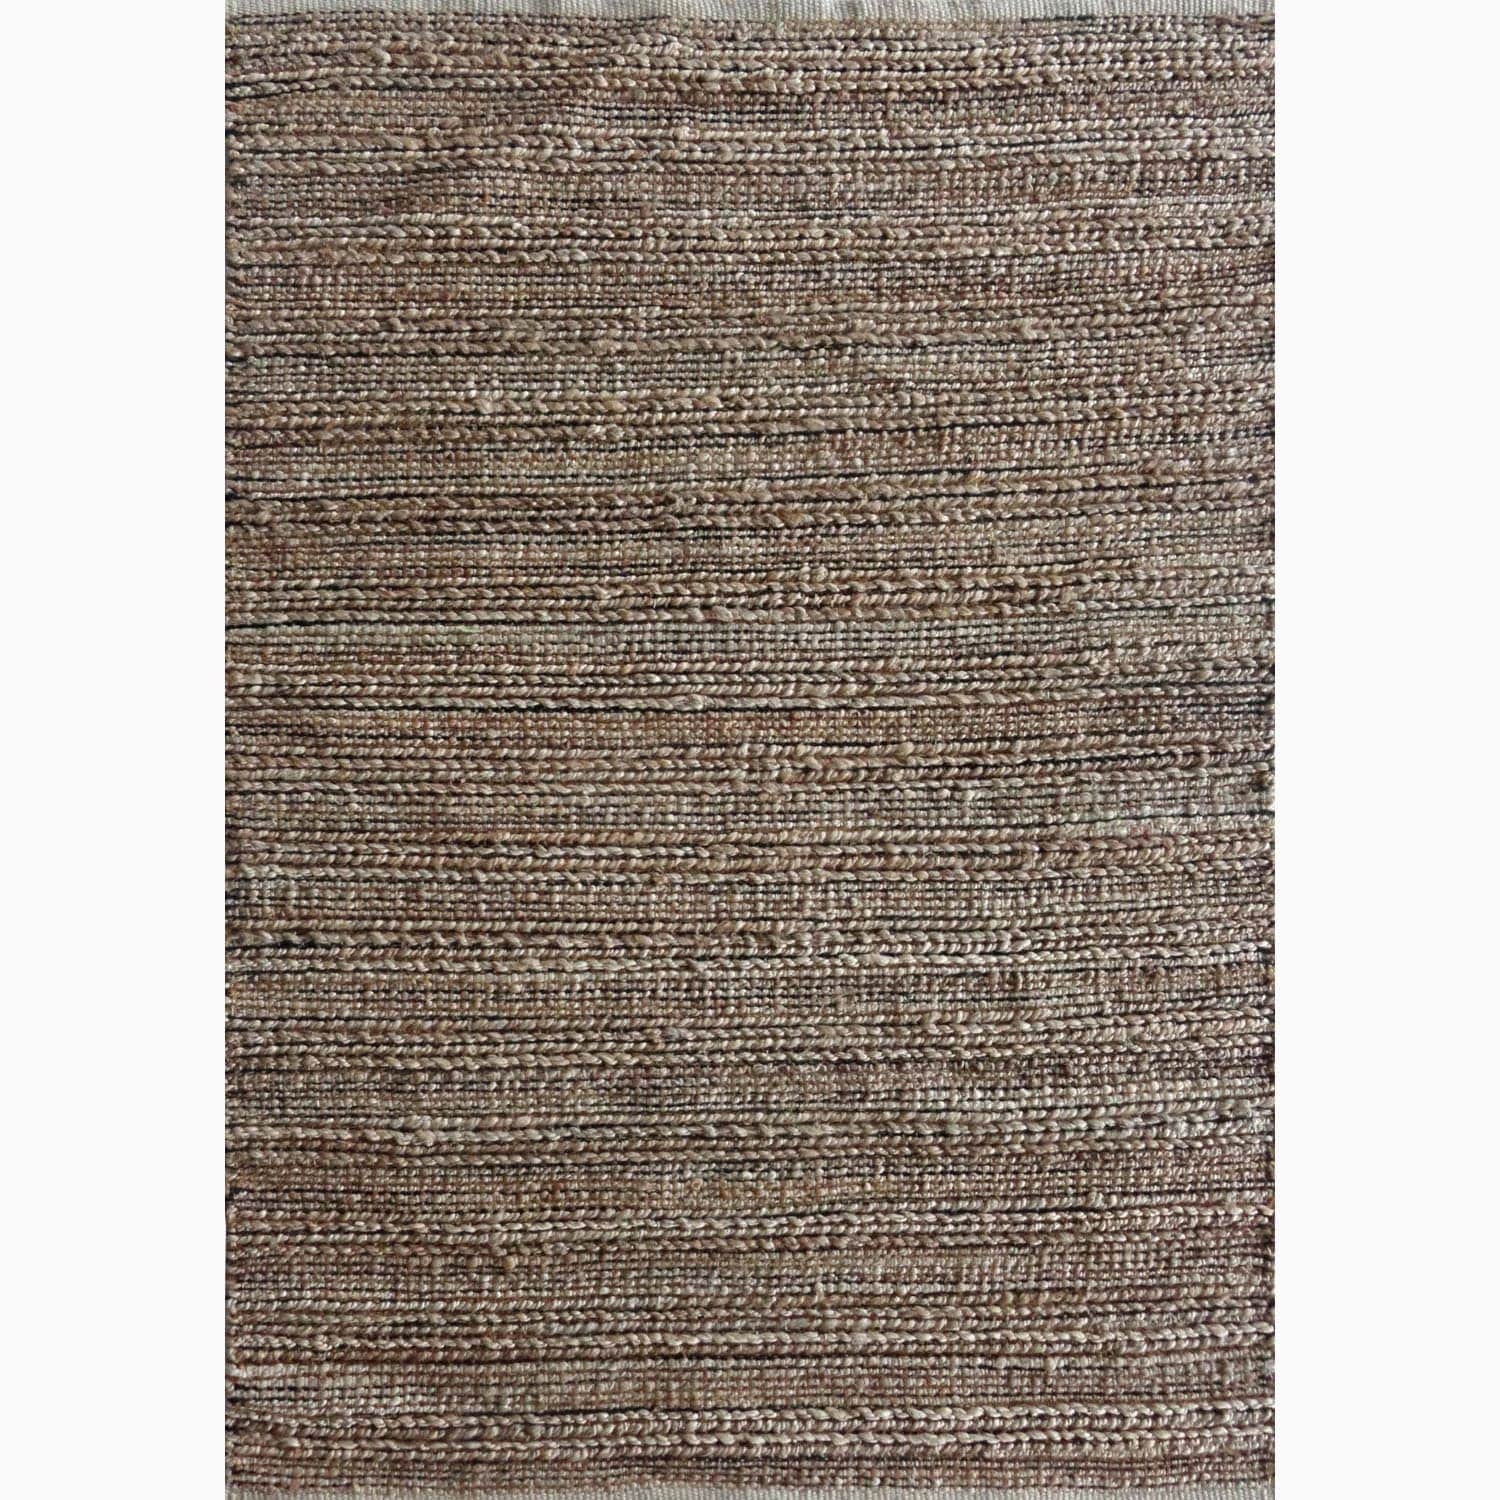 Handmade Solid Pattern Taupe/ Gray Cotton/ Jute Rug (5 X 8)